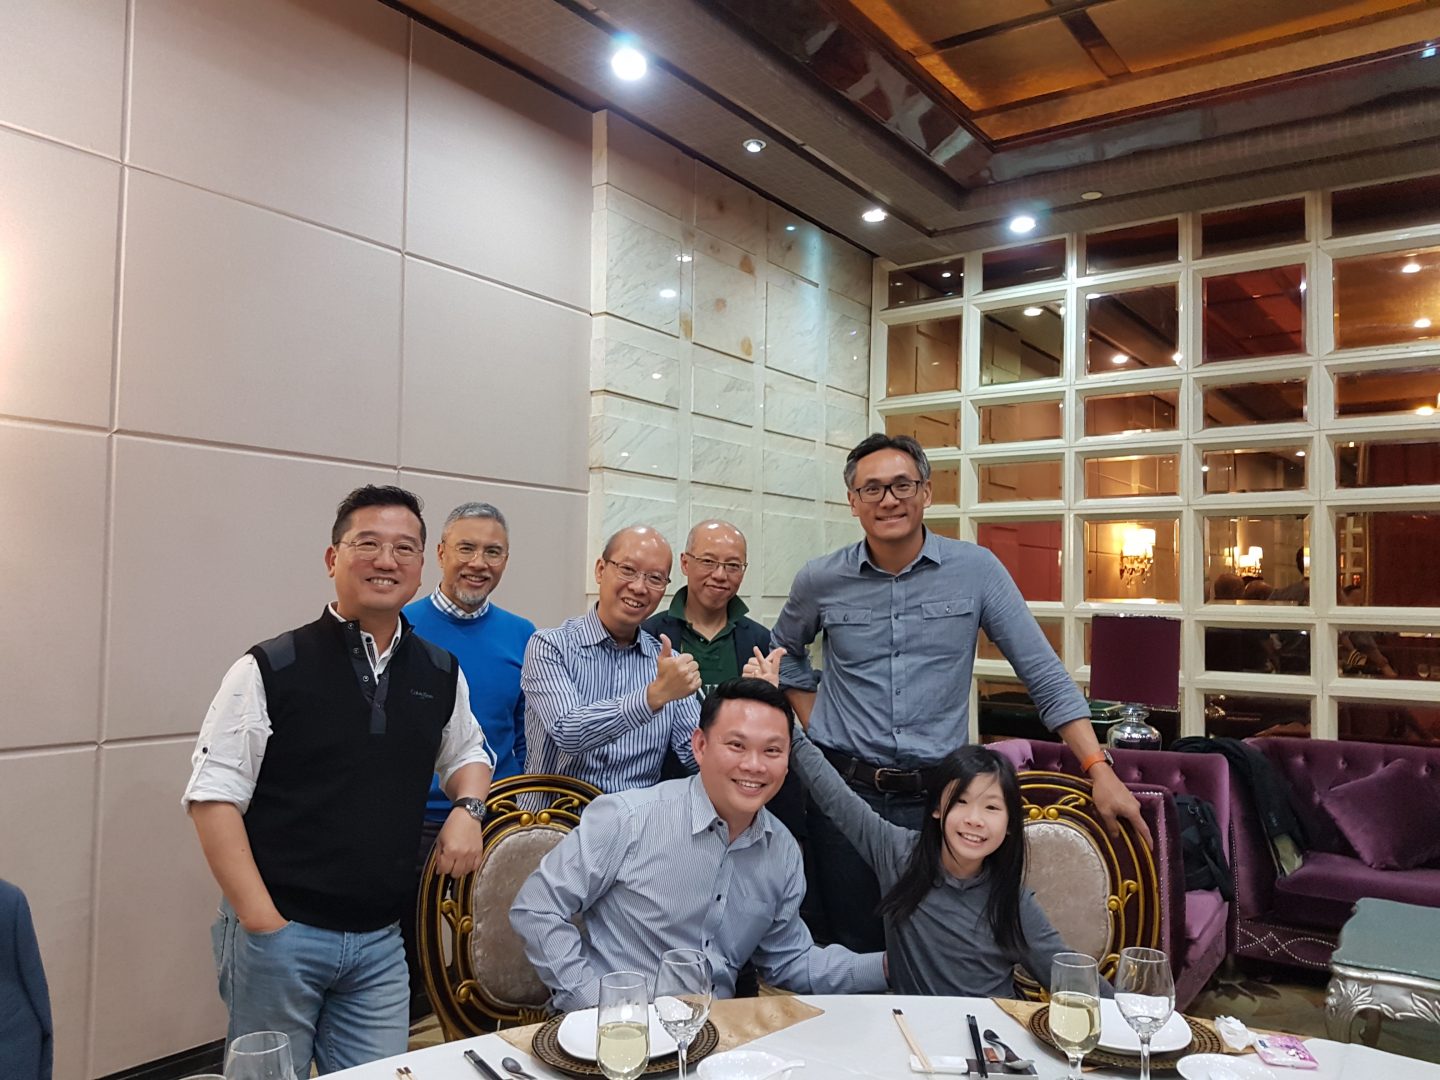 Jeremy with his daughter on a business trip to Shenzhen, China. They met leaders of a big fashion company and guided them on setting a goal to donate one million pieces of clothing to various charities.